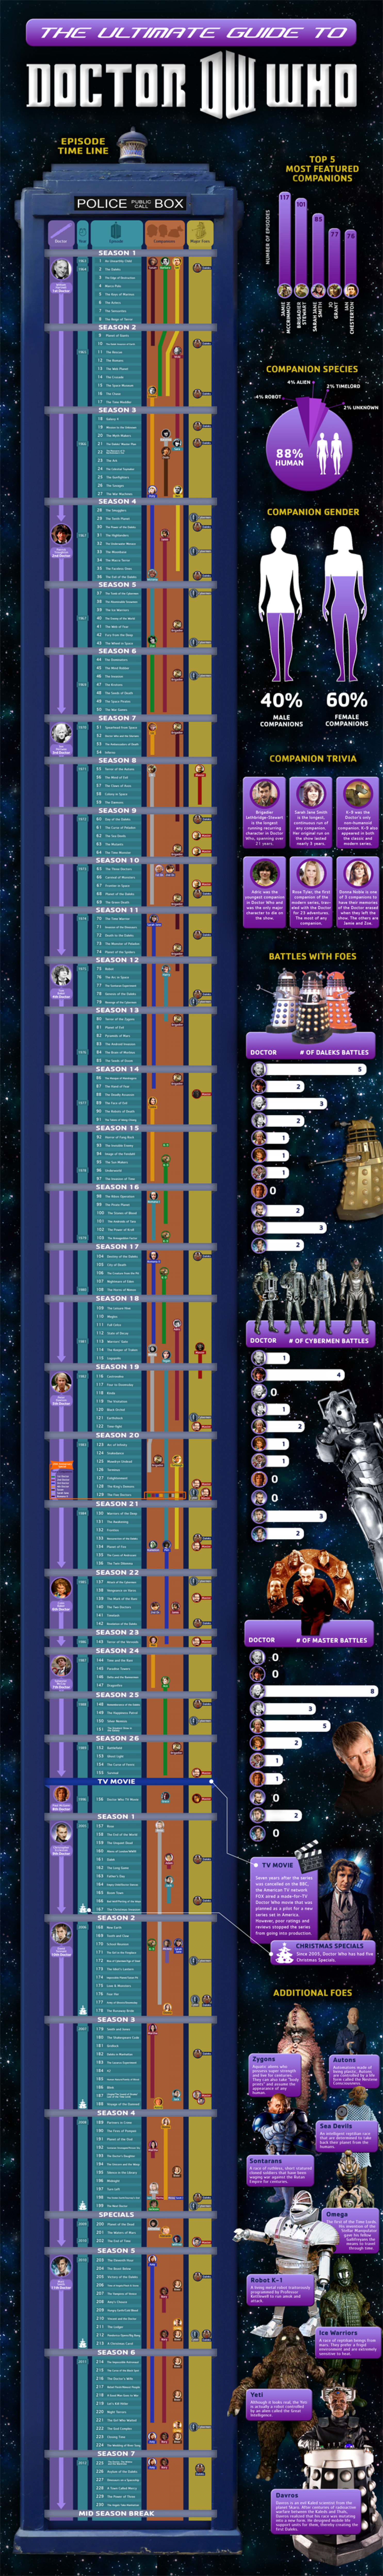 Dr. Who Timeline Infographic